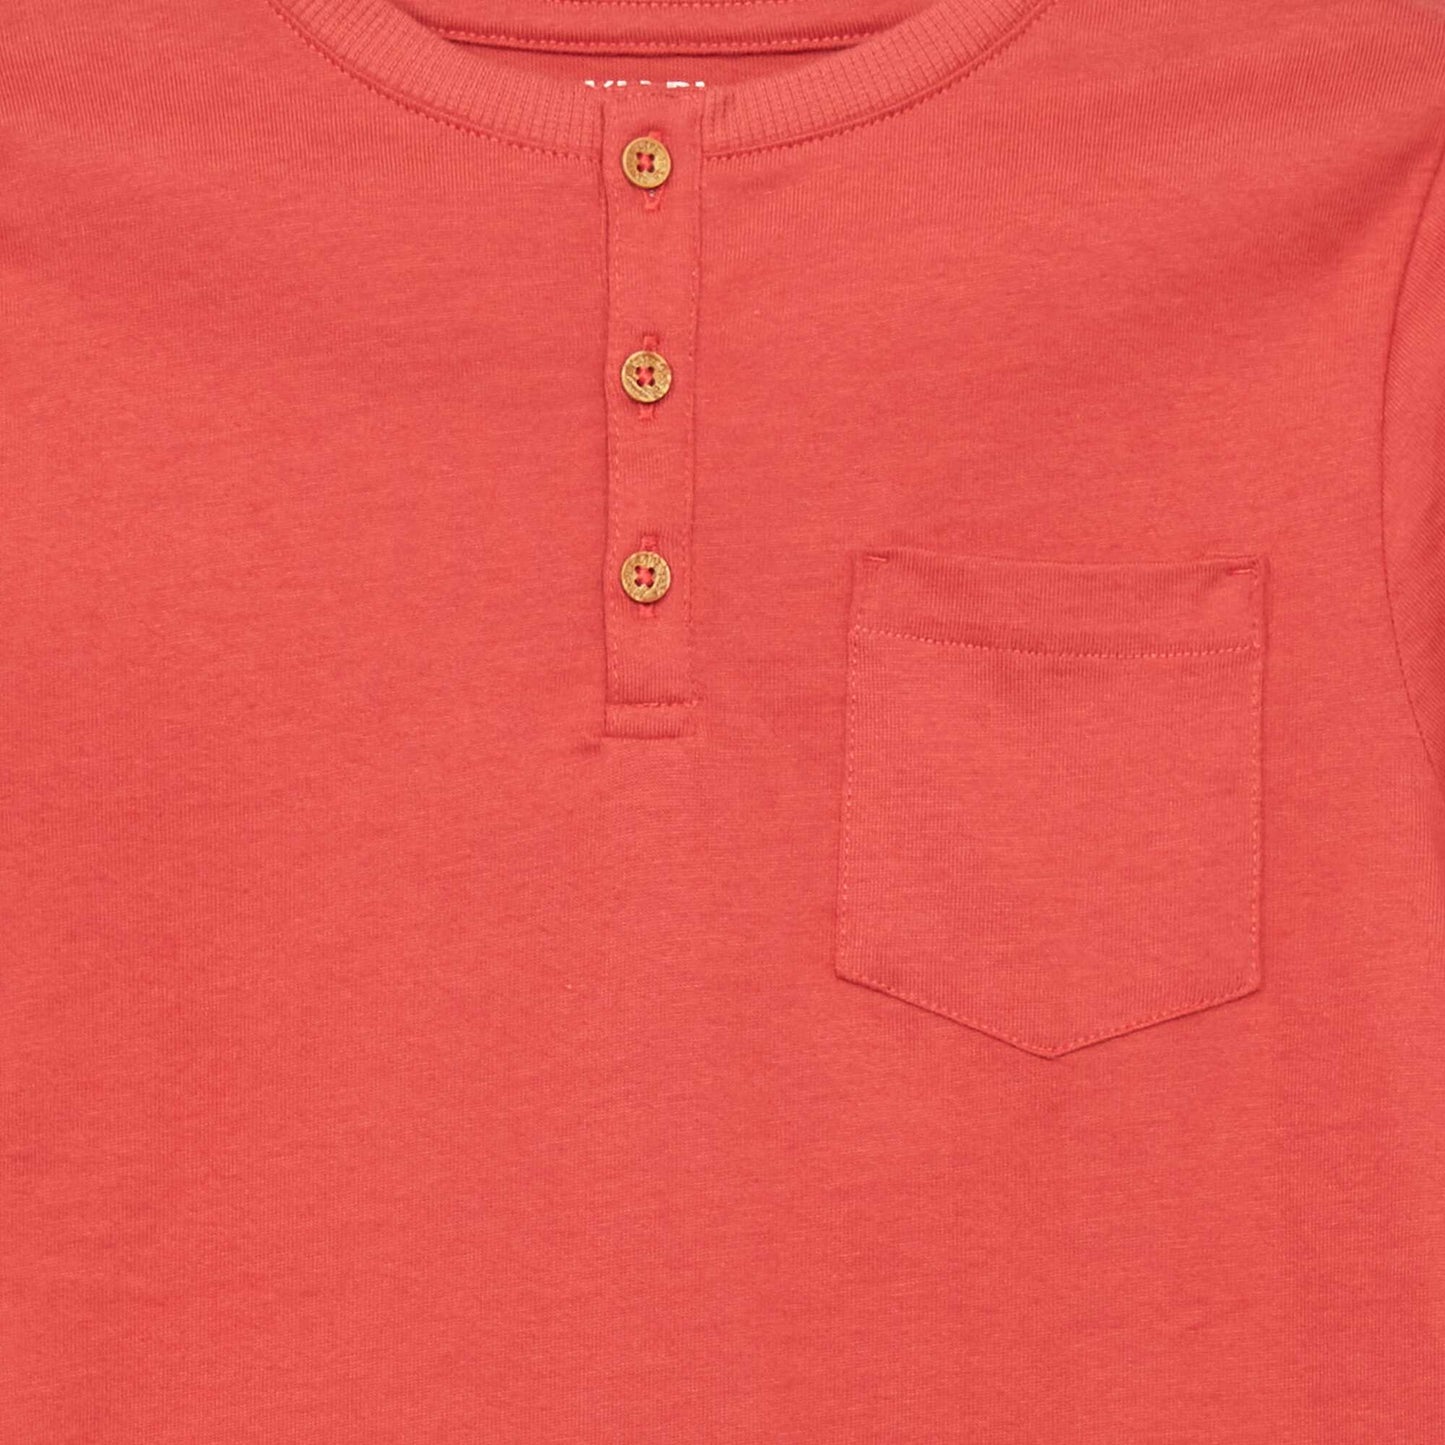 Long-sleeved T-shirt with henley collar raspberry red